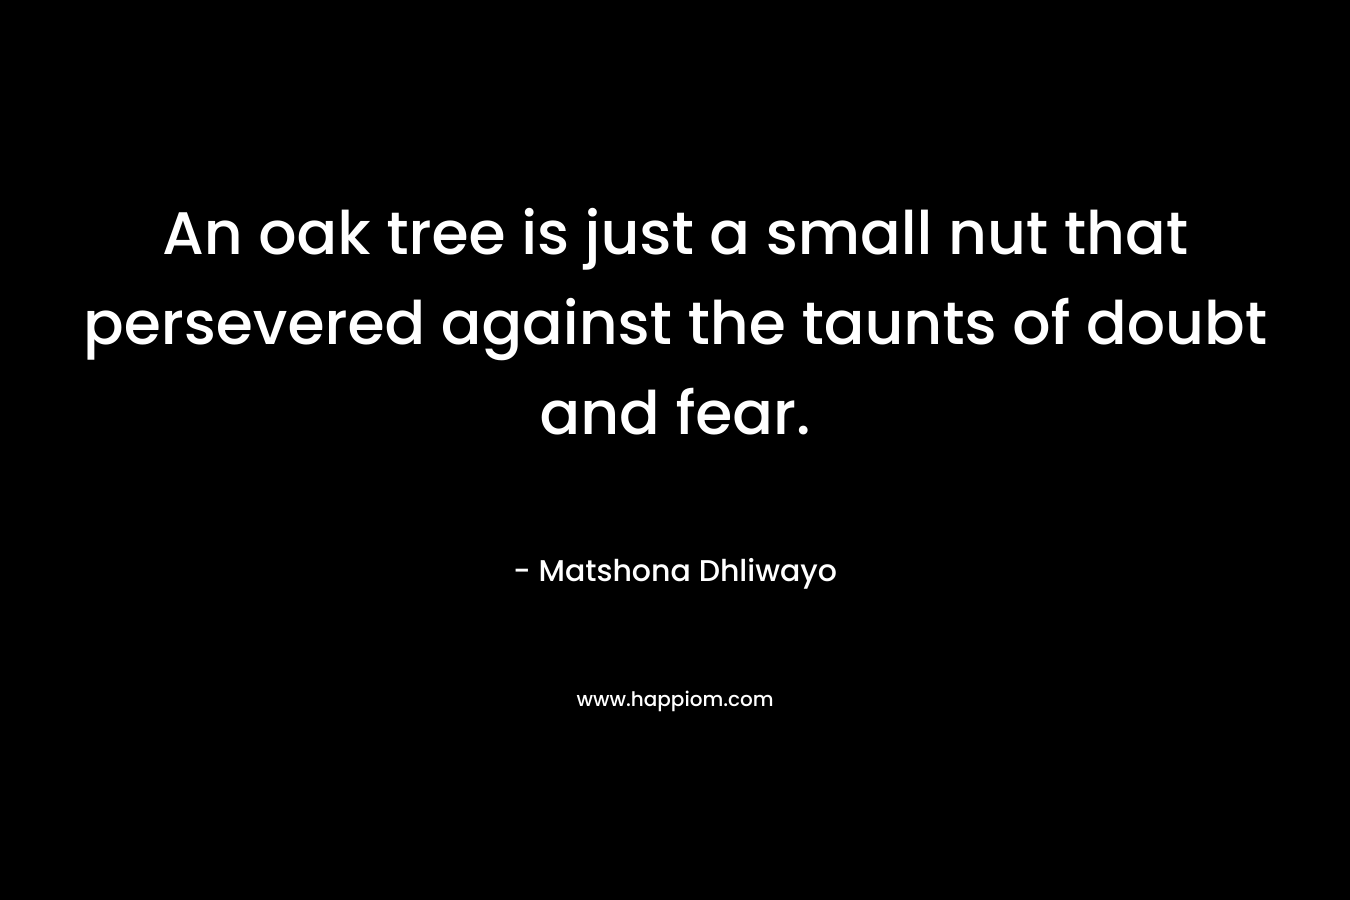 An oak tree is just a small nut that persevered against the taunts of doubt and fear.